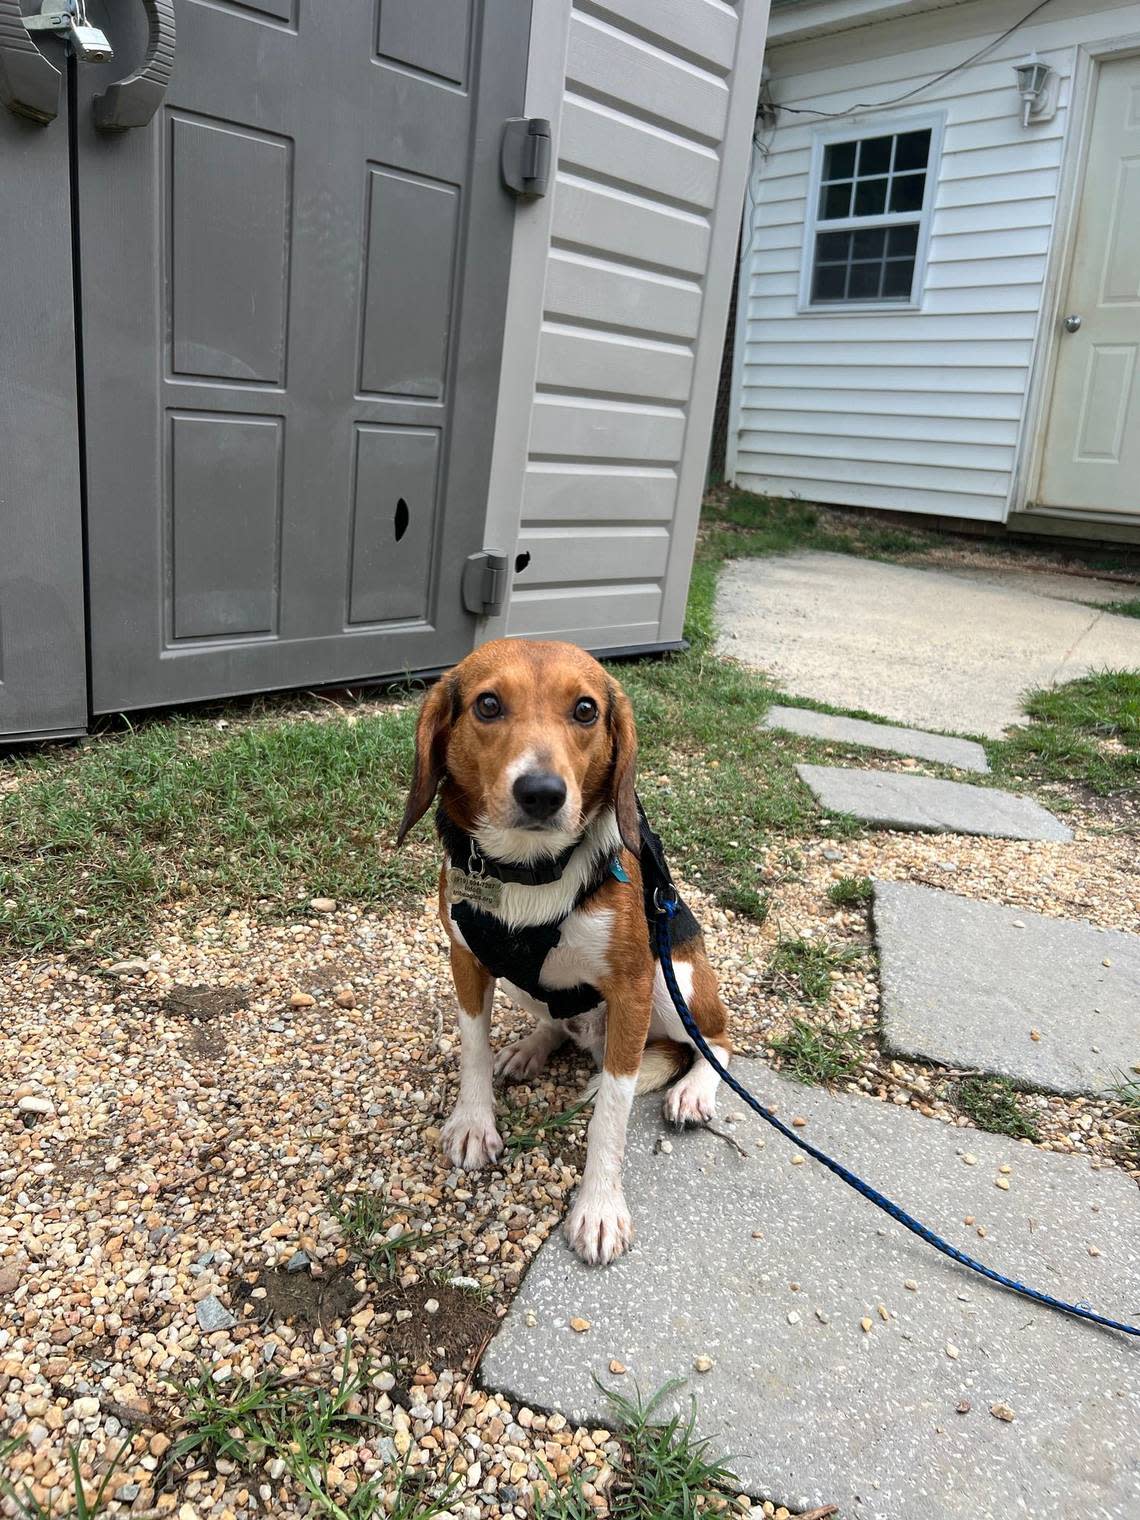 On July, 26, 2022, the Triangle Beagle Rescue of North Carolina welcomed 79 beagles. They were part of the 4,000 beagles rescued from a breeding facility in Virginia.